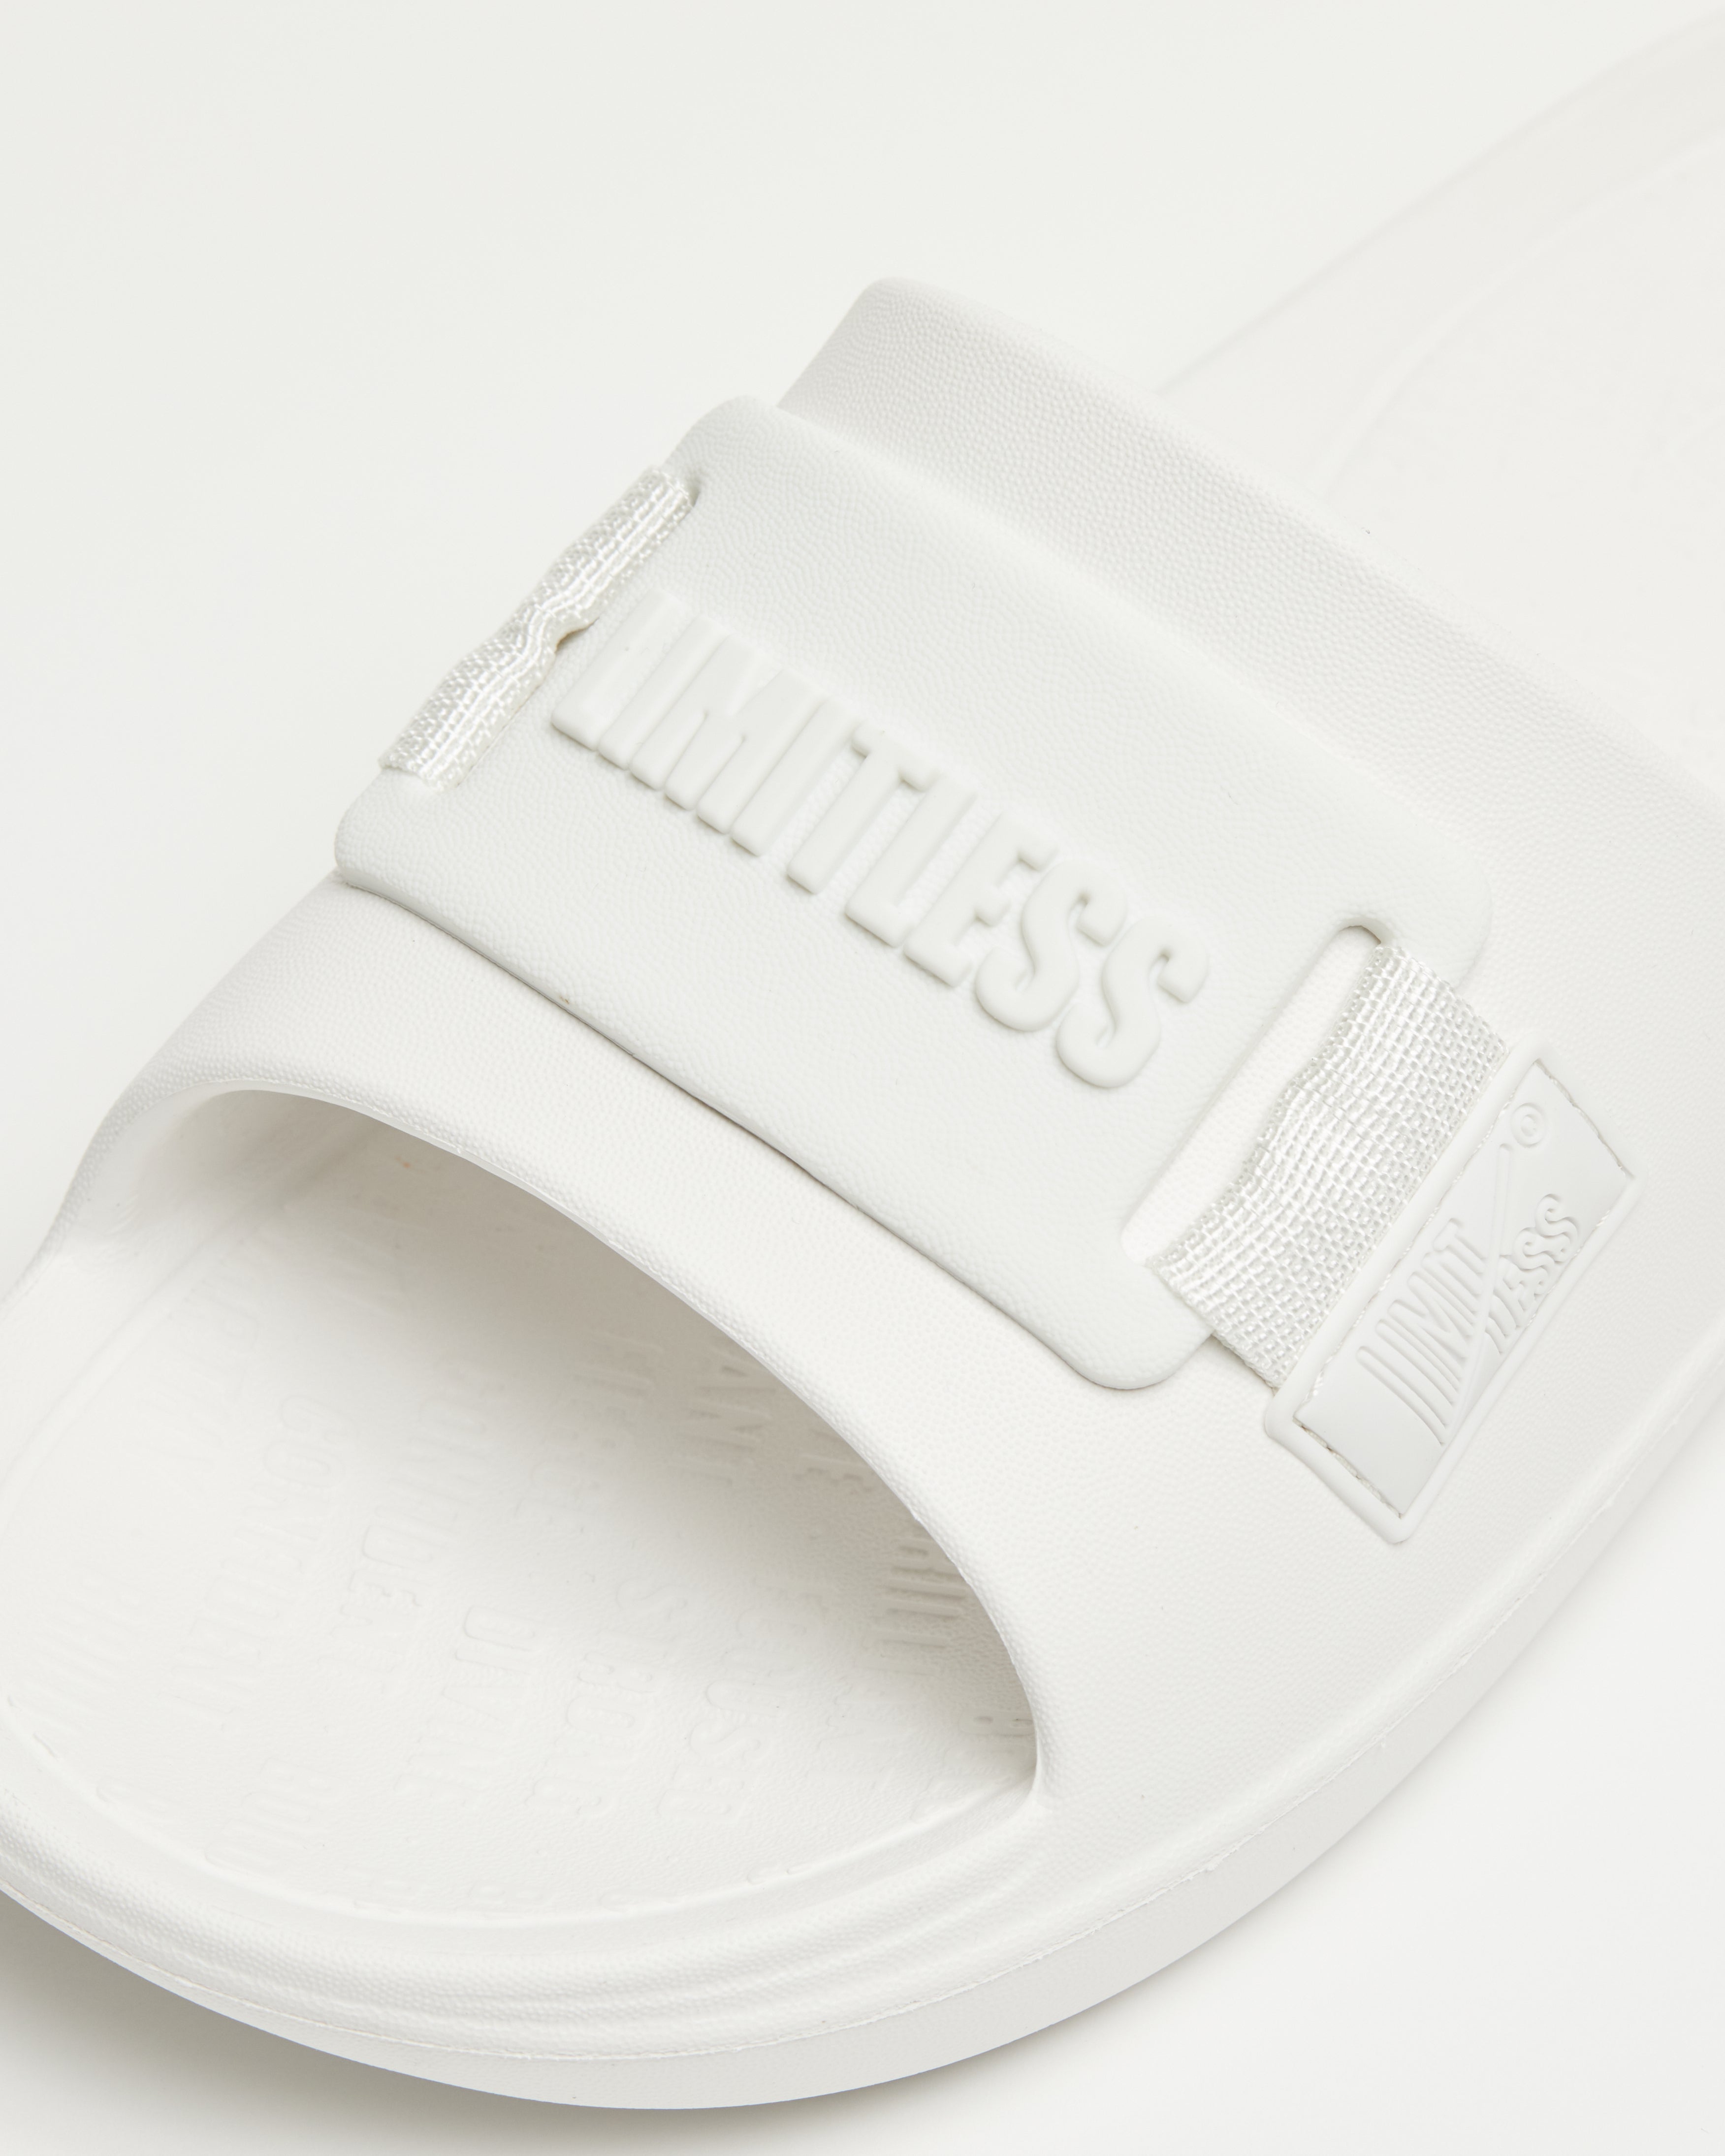 LIMITLESS SLIDES™ WITH ESSENTIAL TIBAH™ QUAD - GRAIN VALLEY HIGH SCHOOL EDITION